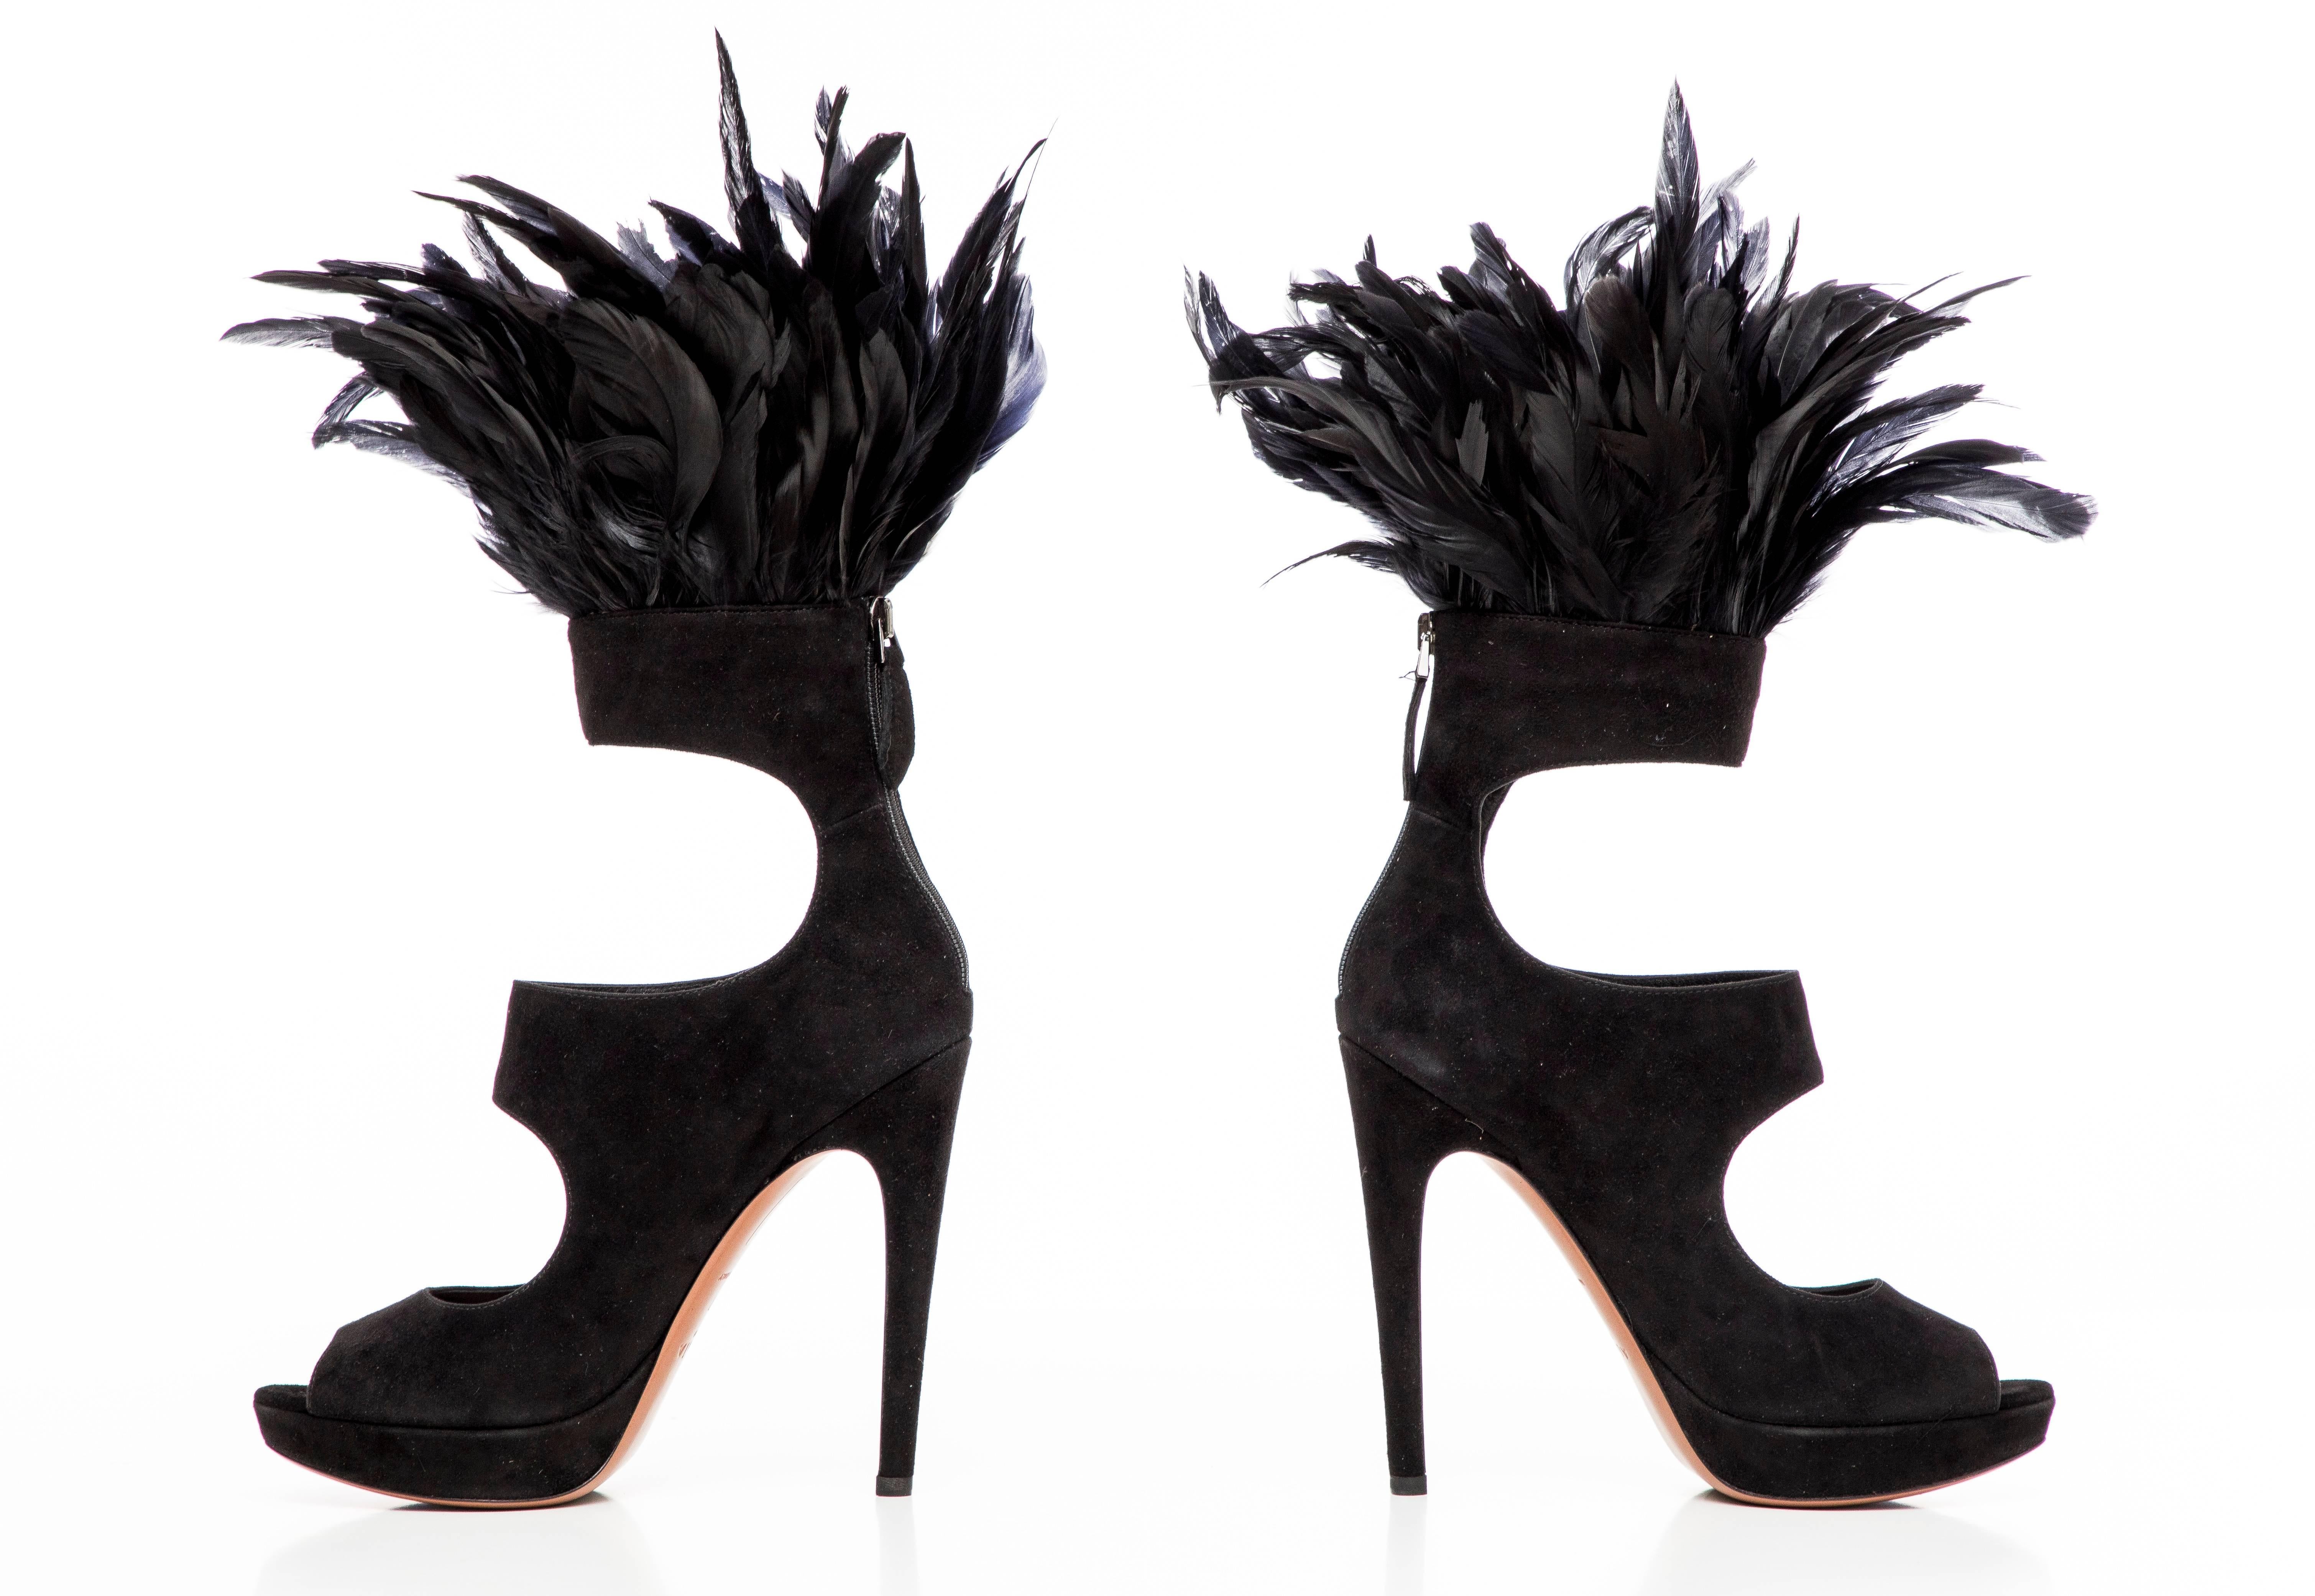 Azzedine Alaïa, Fall 2010 black suede peep-toe platform pumps with cutouts throughout, covered heels and feather trim at uppers. Includes box and dust bag. 

IT. 37
Us. 7

Heels: 5.25, Platforms: 1
